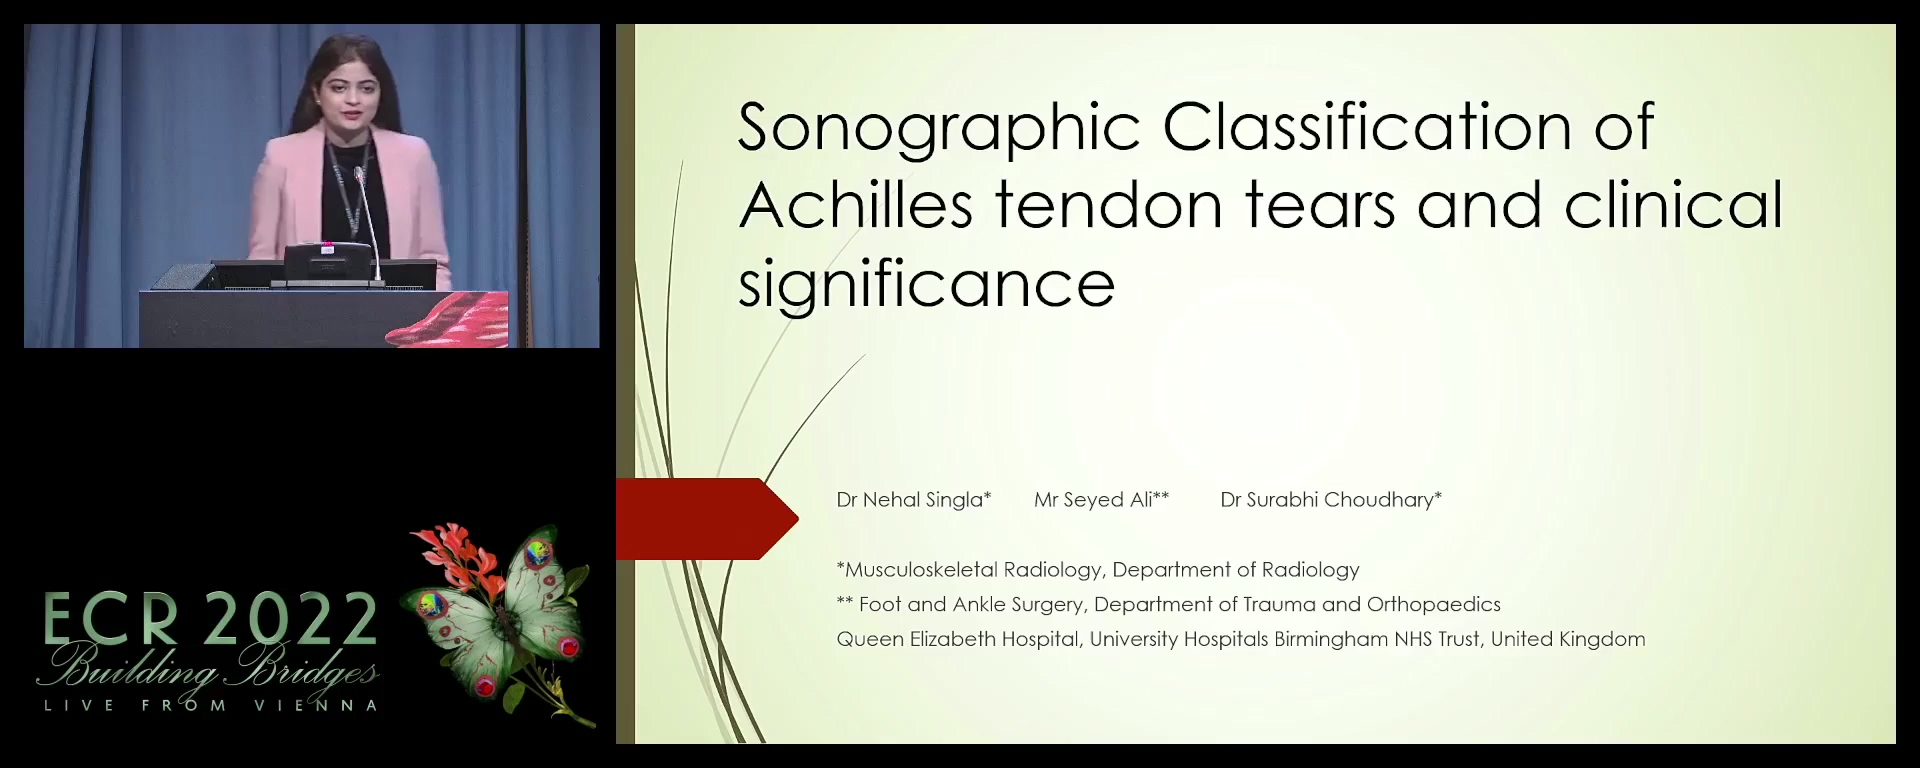 Sonographic classification of Achilles tendon tears and its clinical significance